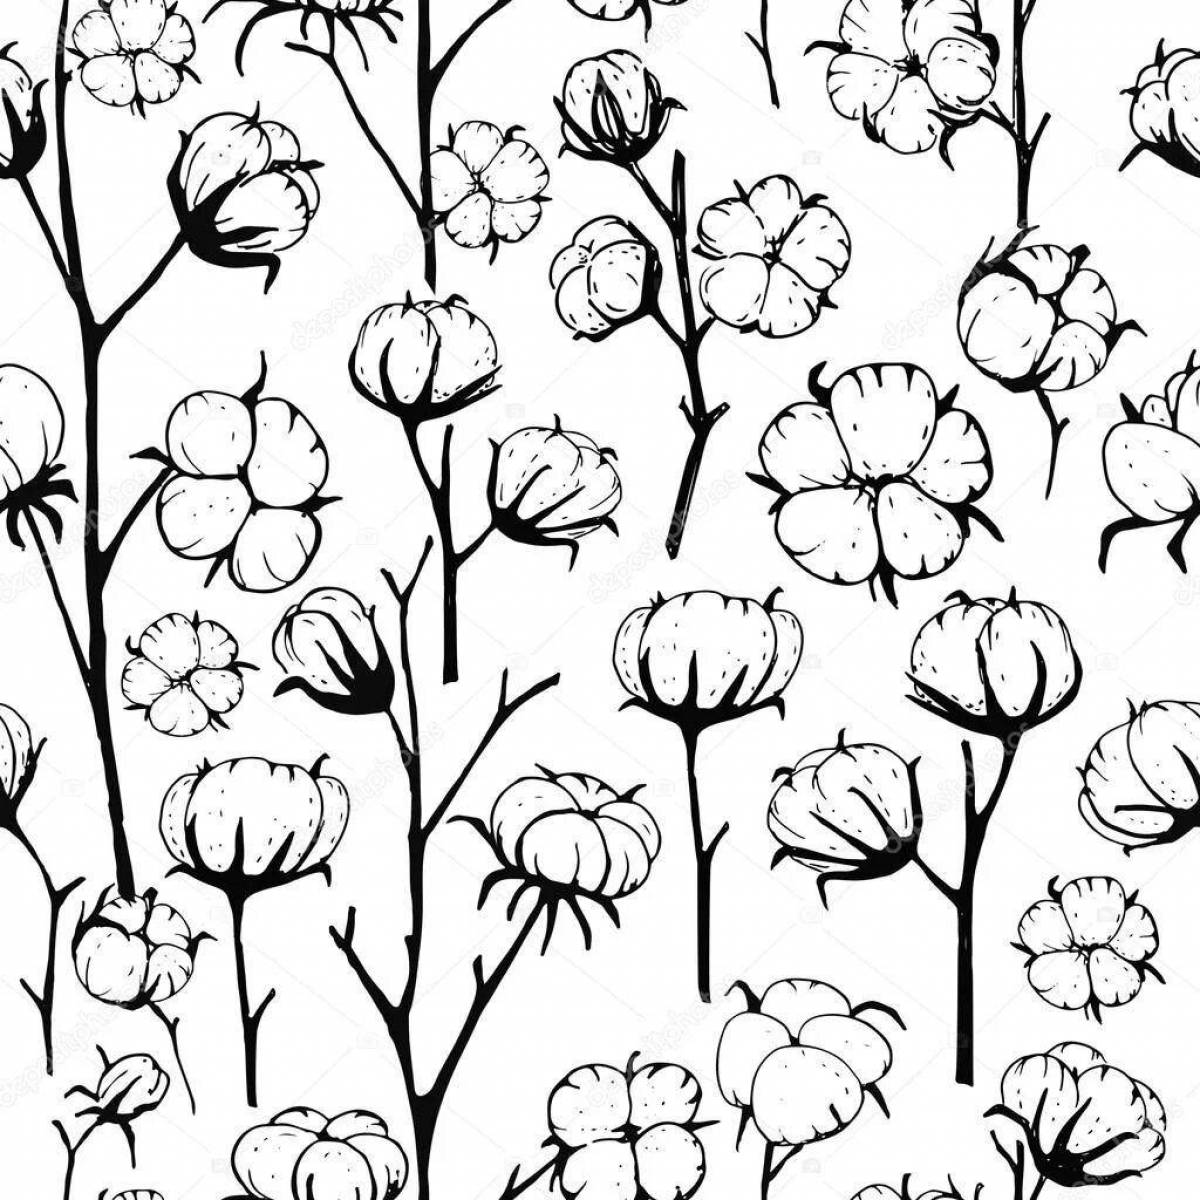 Awesome cotton coloring page